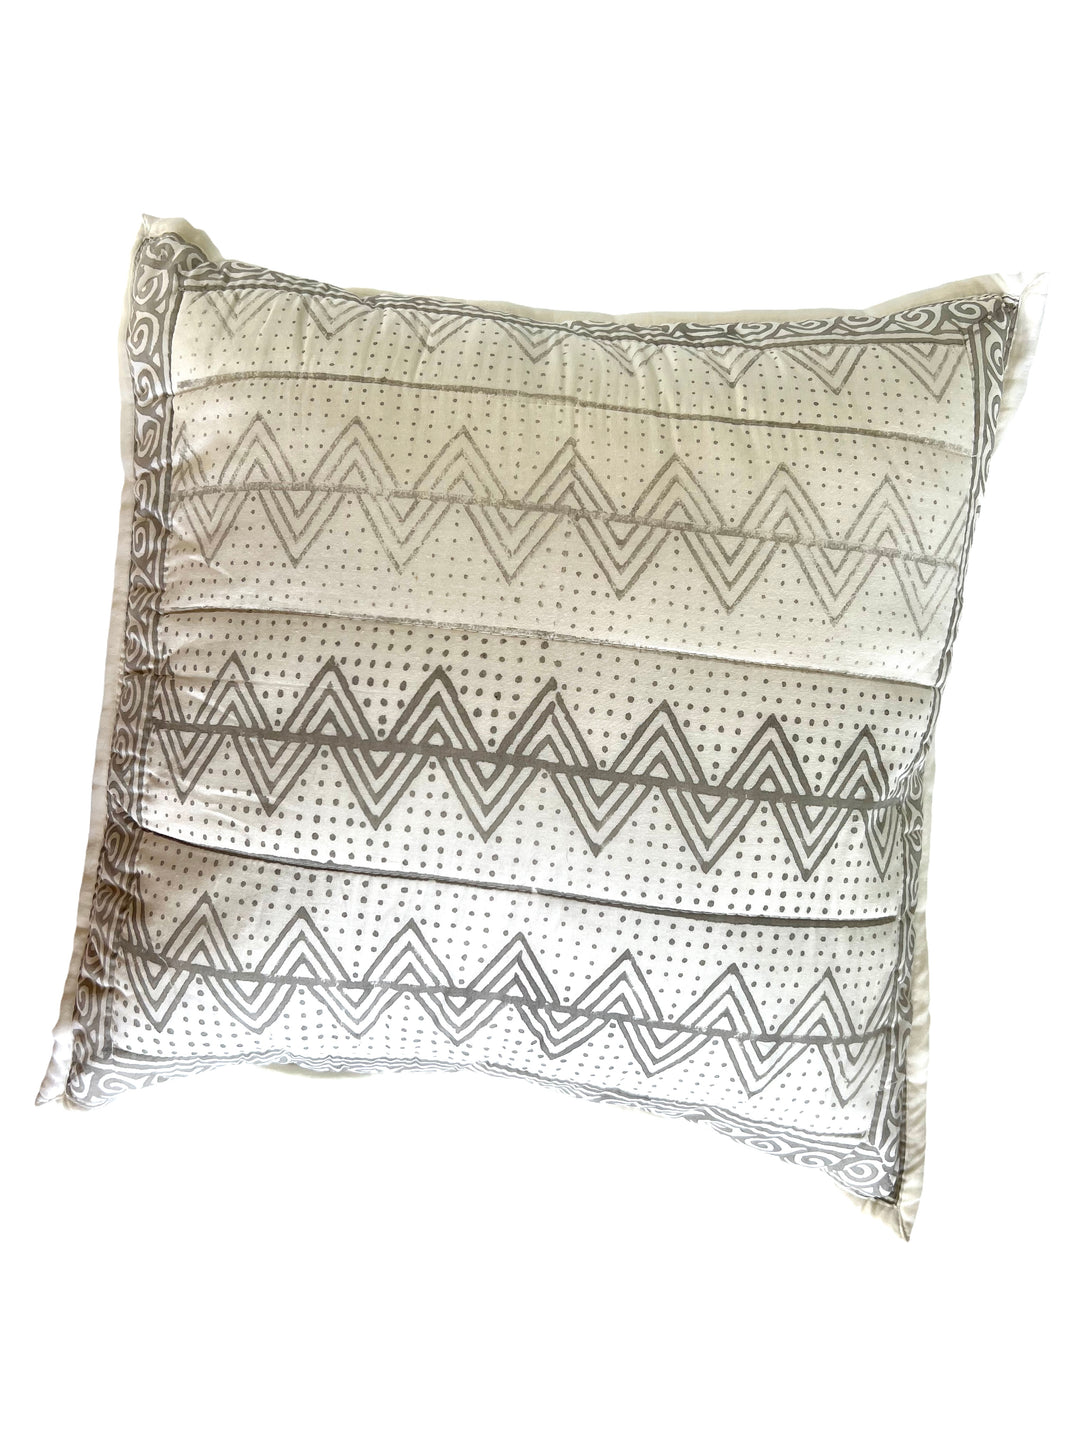 Grey Chevron Stripe - 16" square quilted pillow cover